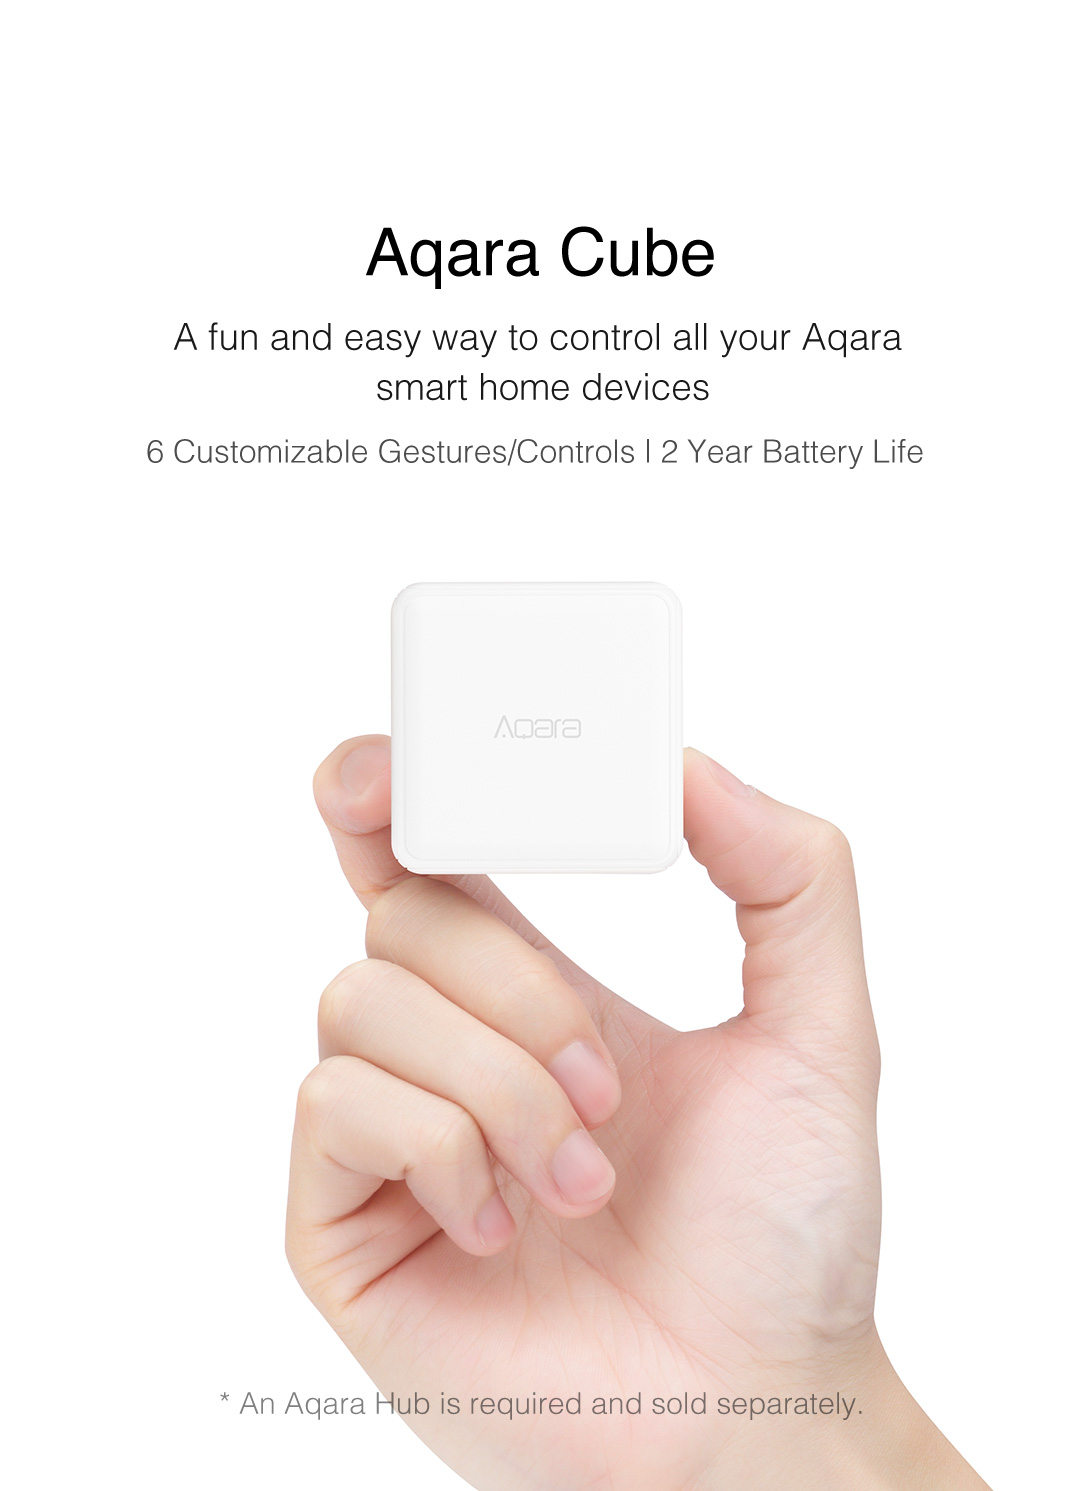 Aqara Cube - A fun and easy way to control your smart home devices